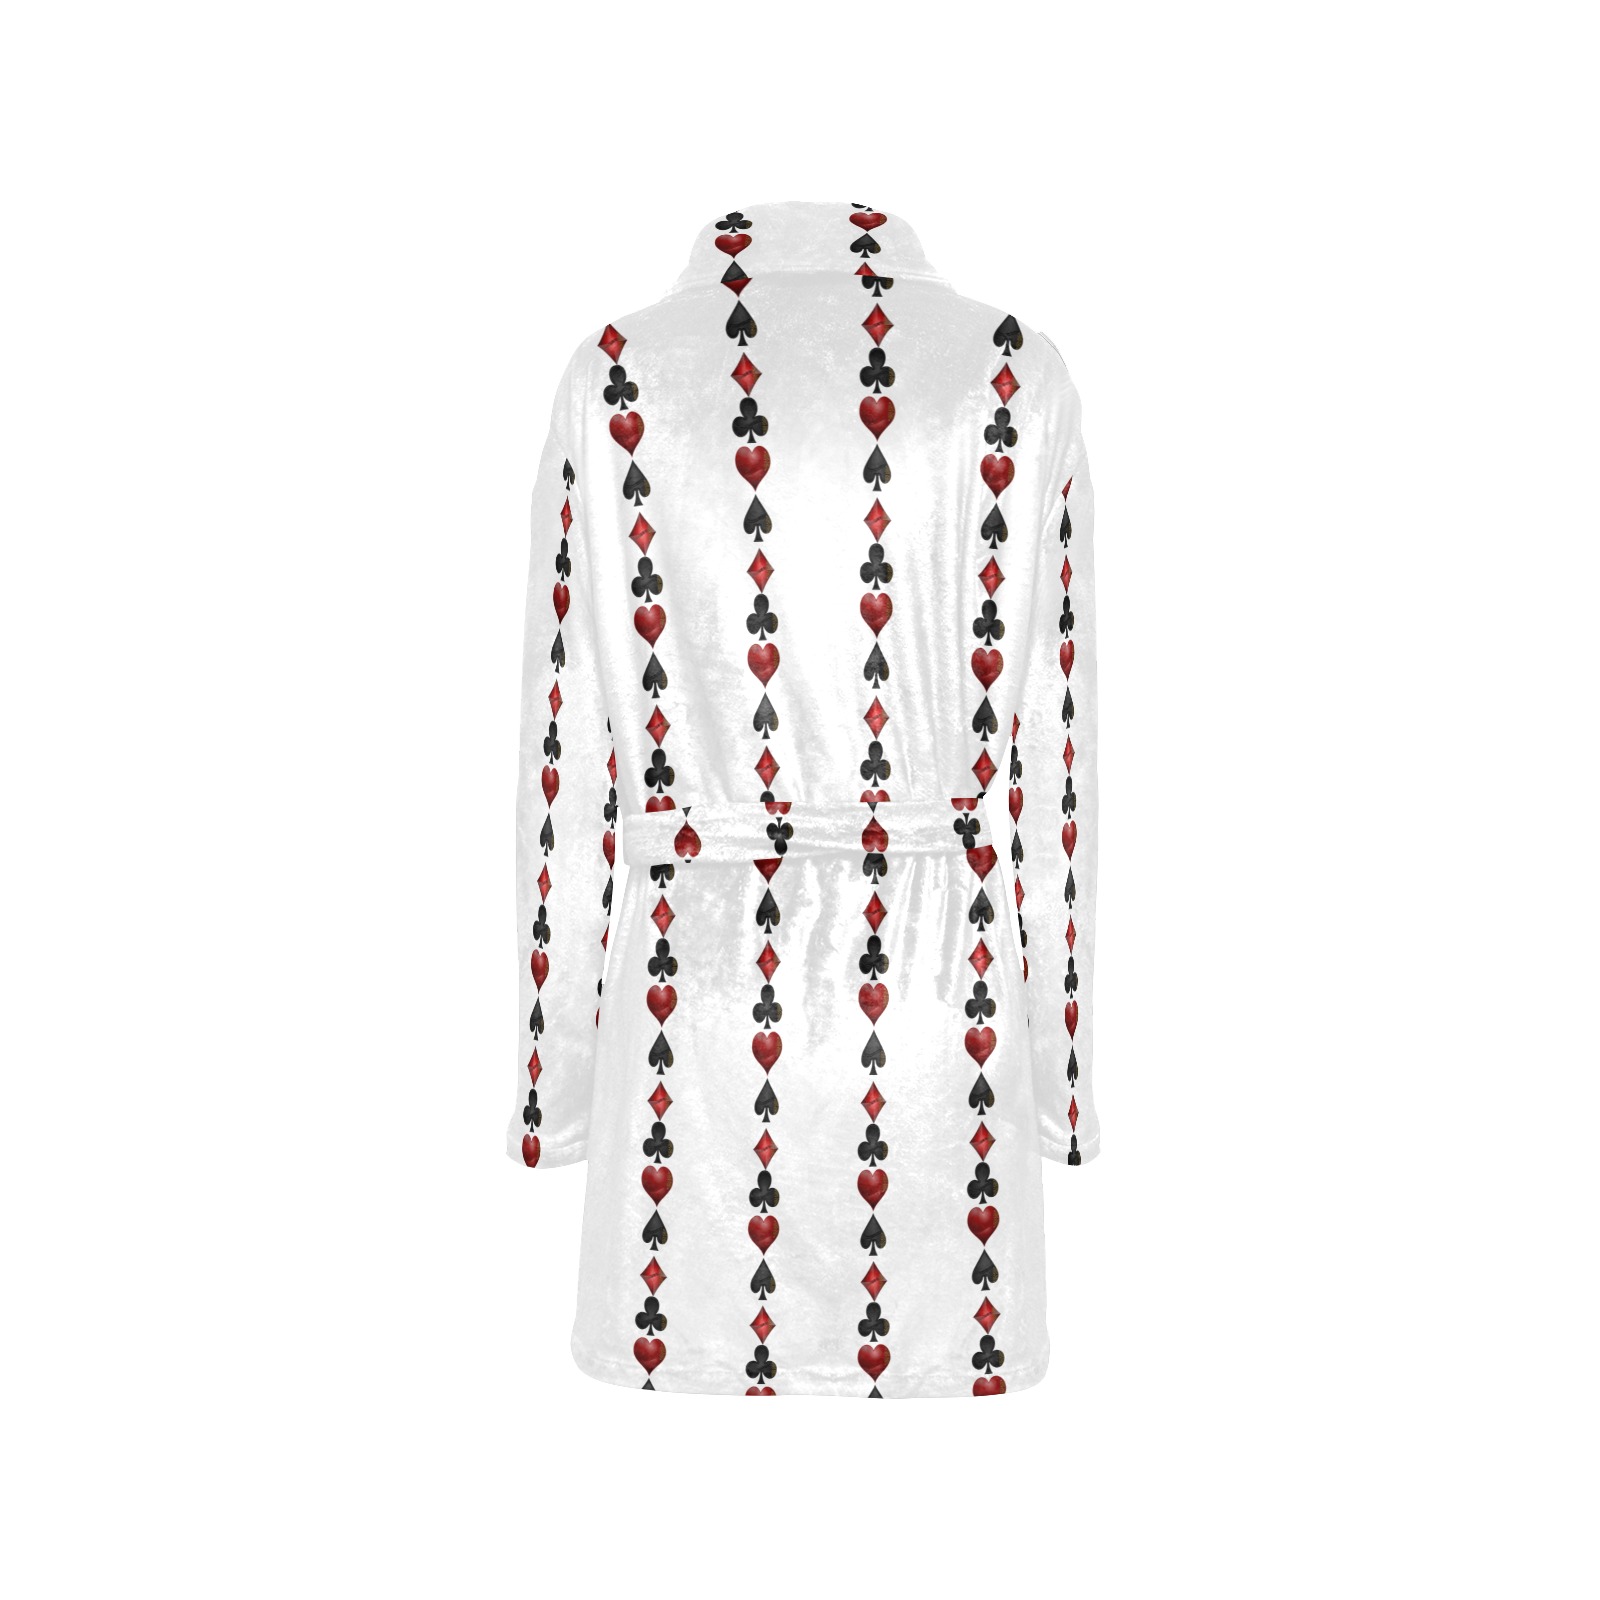 Black Red Playing Card Shapes - White Women's All Over Print Night Robe